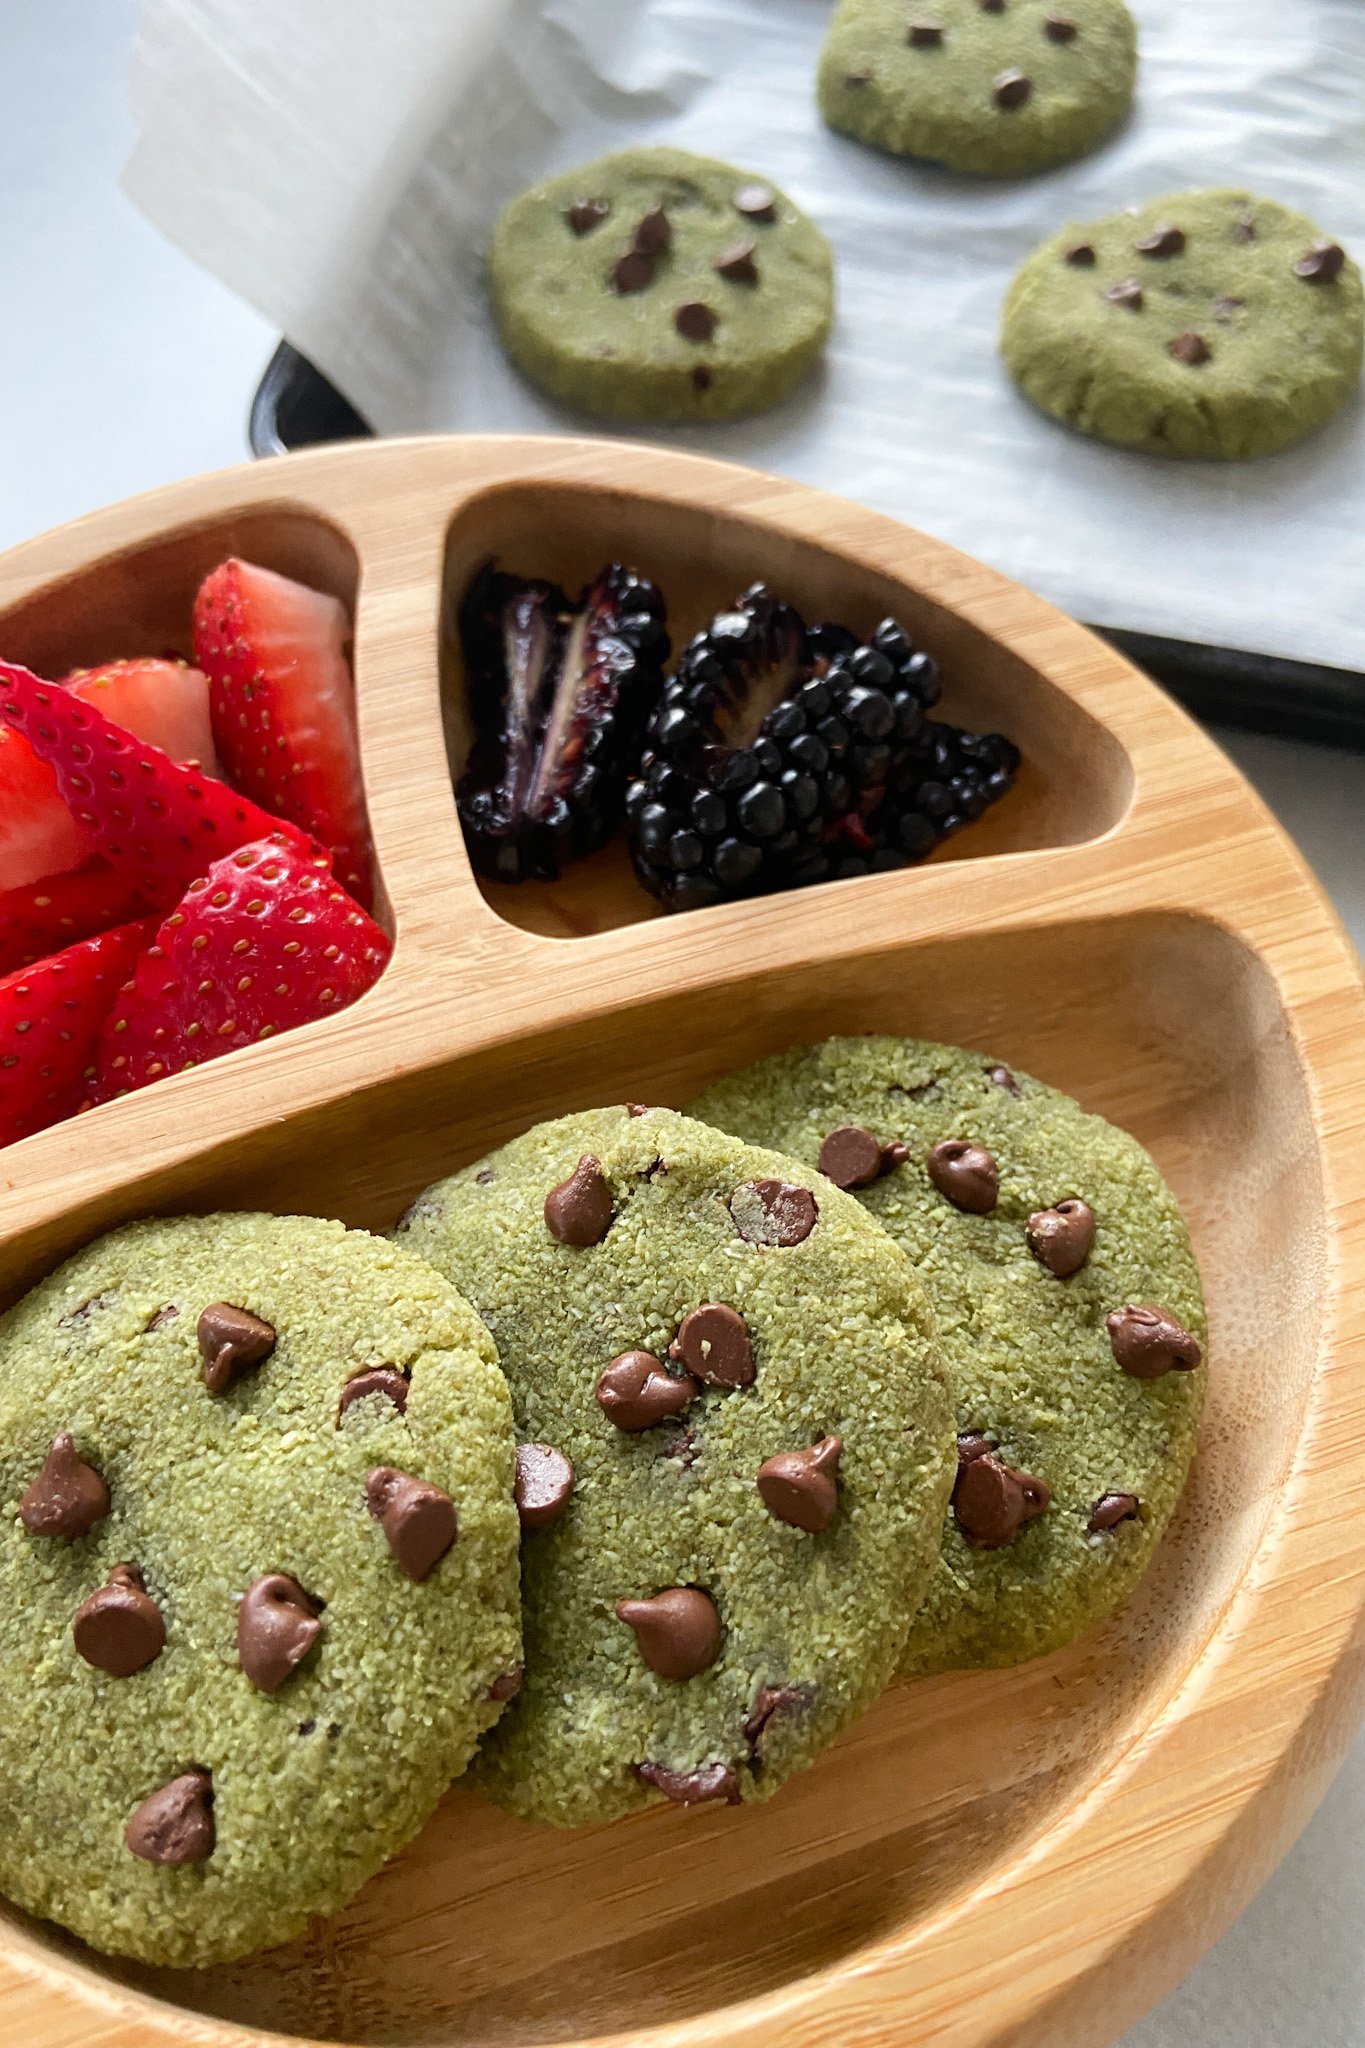 Spinach cookies served with berries